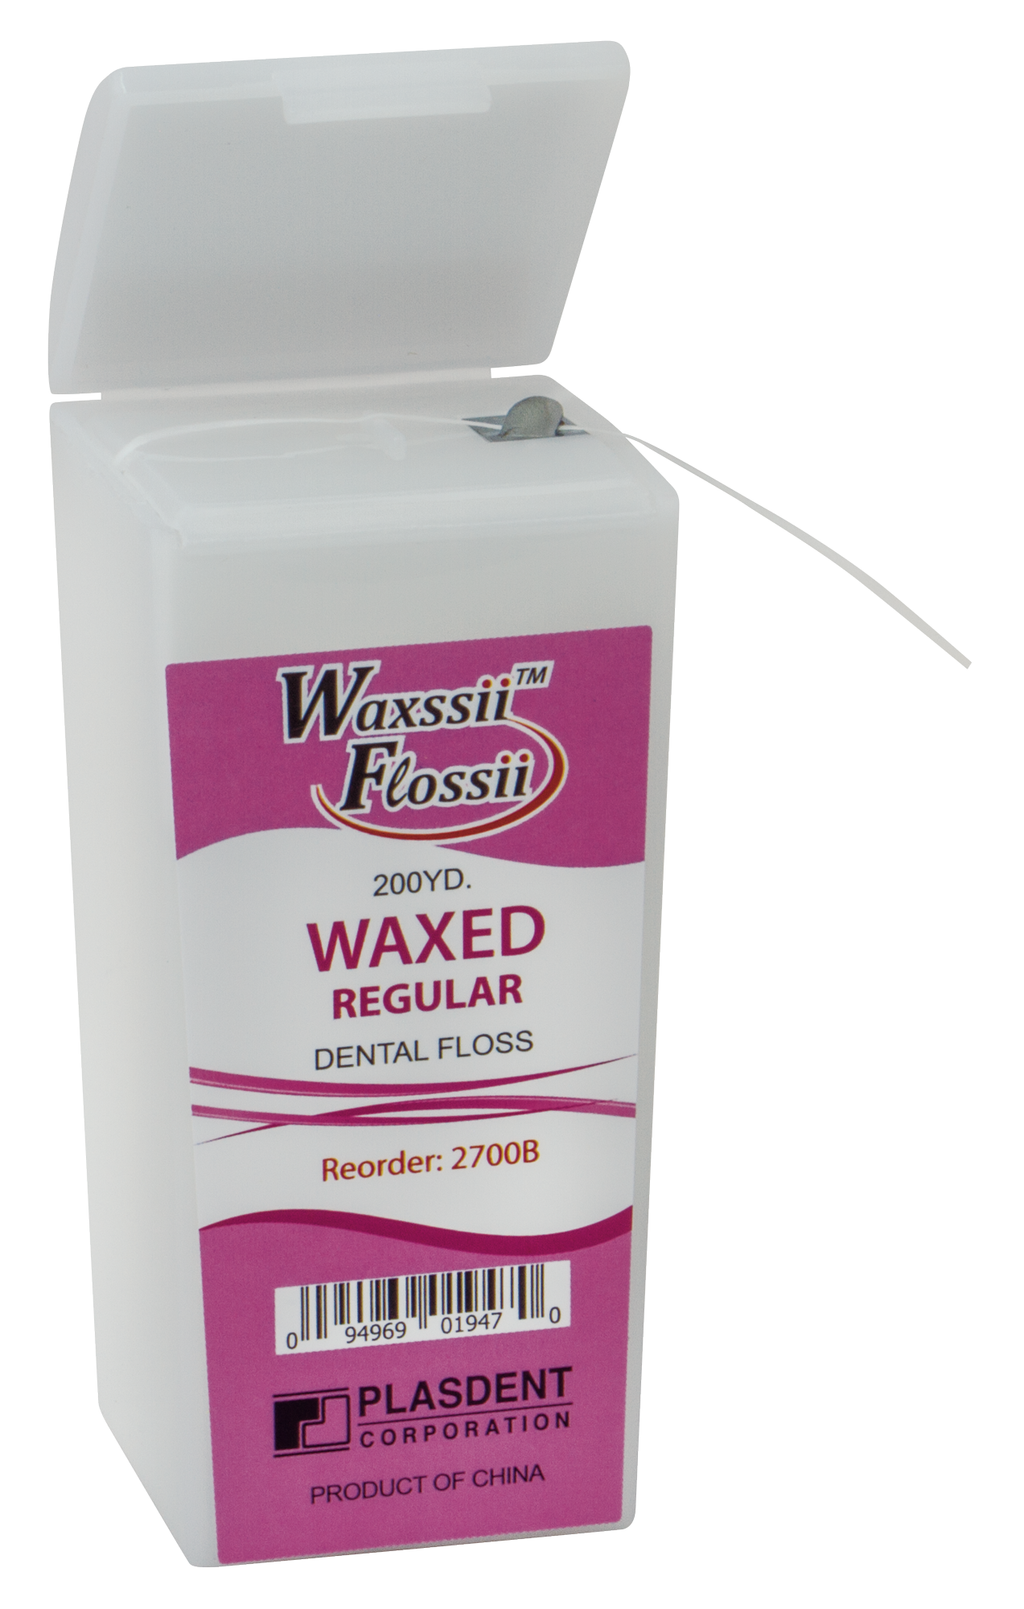 Premium Waxed Dental Floss With Dispenser (Unflavored)